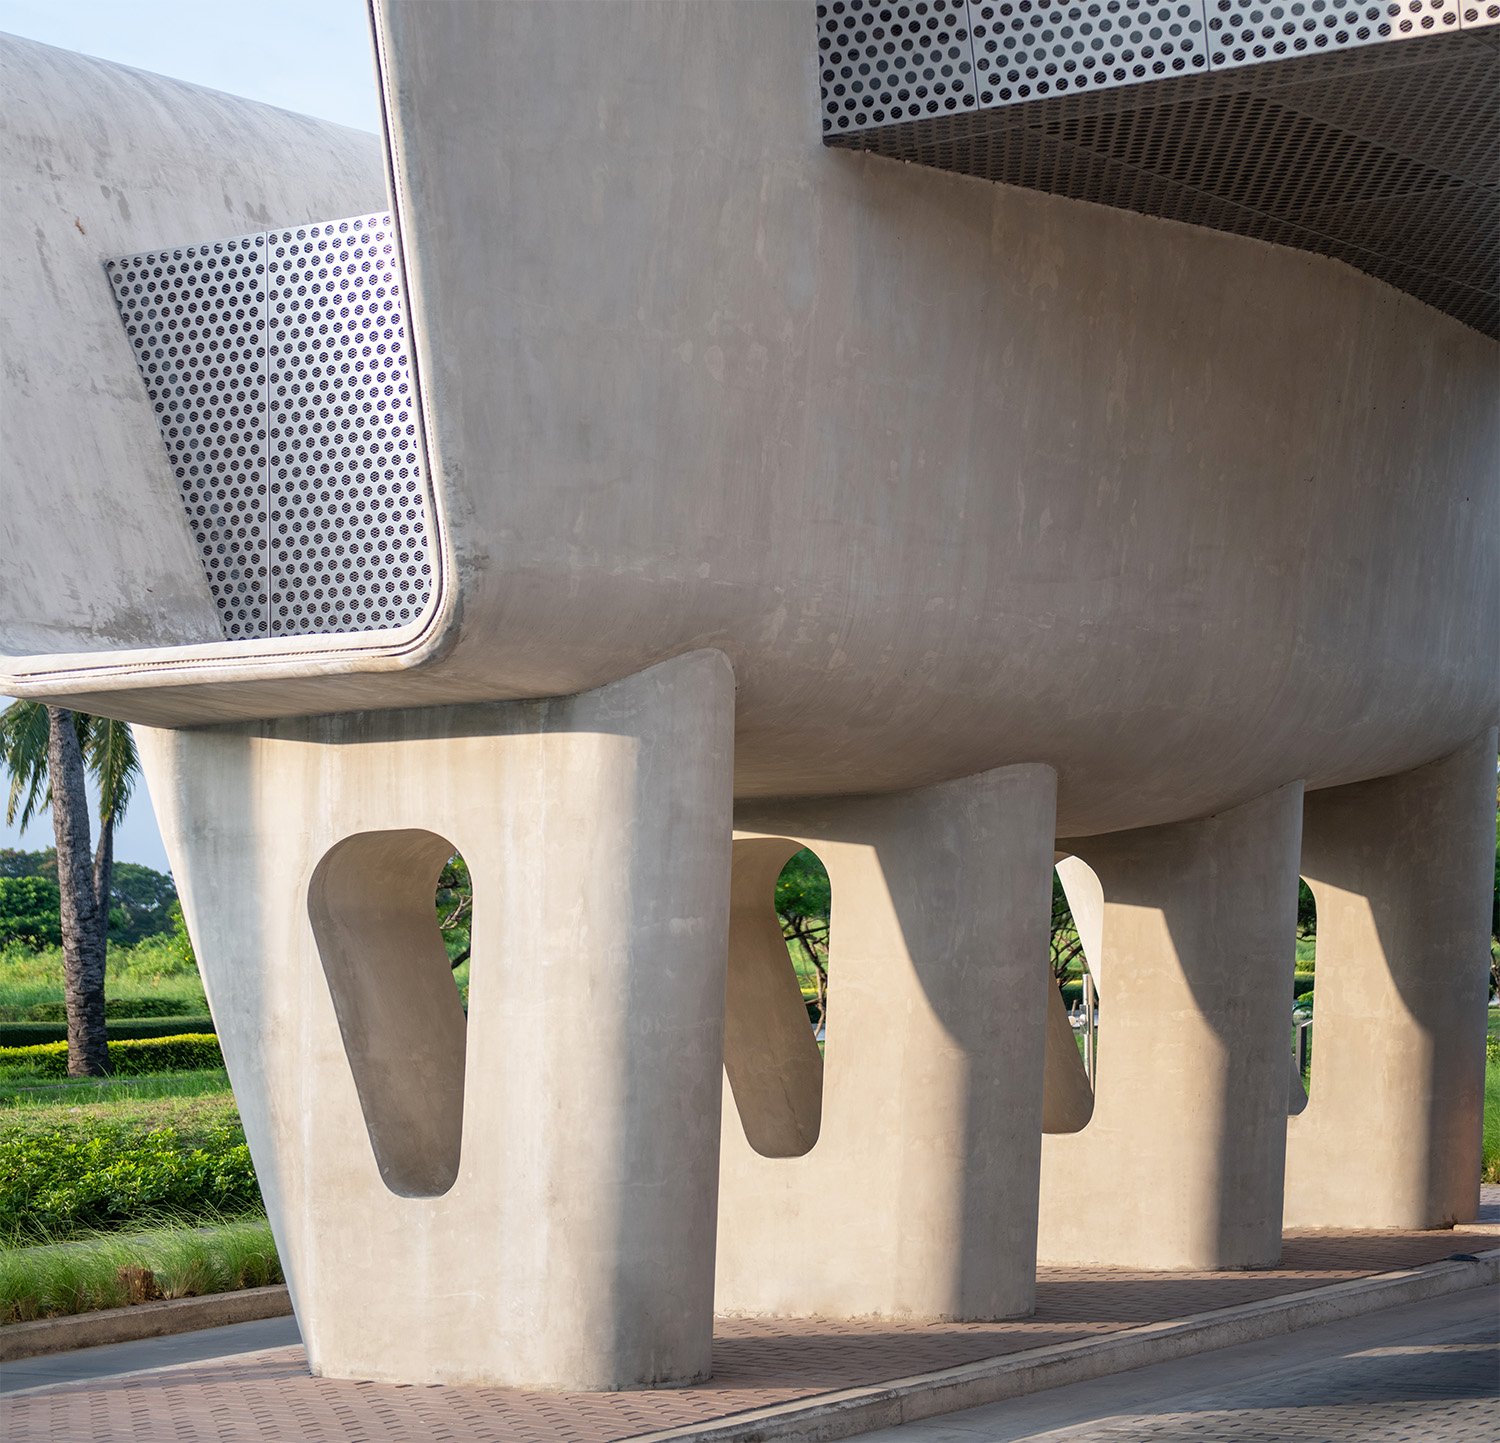 Partial close-up view of the structural base, showcasing solids and voids, light and shadow. | Weerapon Singnoi